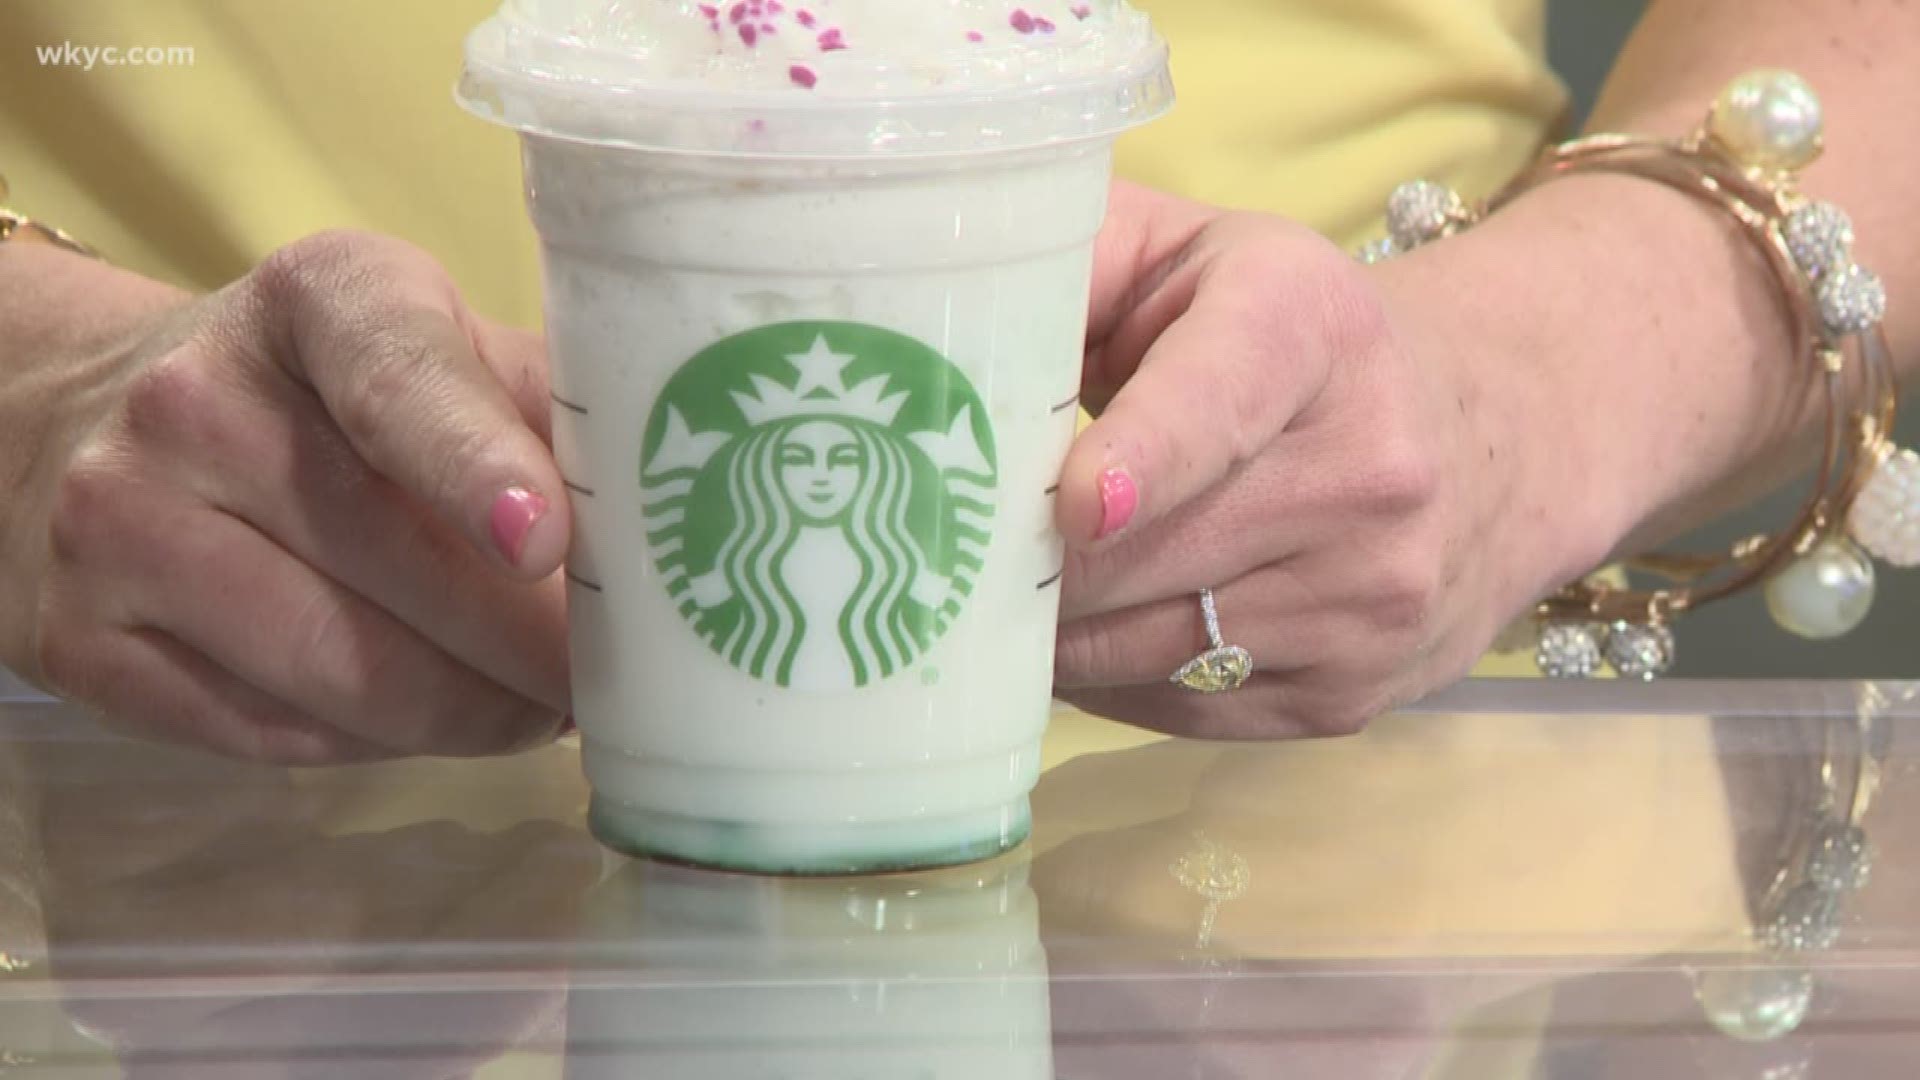 March 22, 2018: How is the new Crystal Ball Frappuccino at Starbucks? The WKYC morning team gave it a taste test.